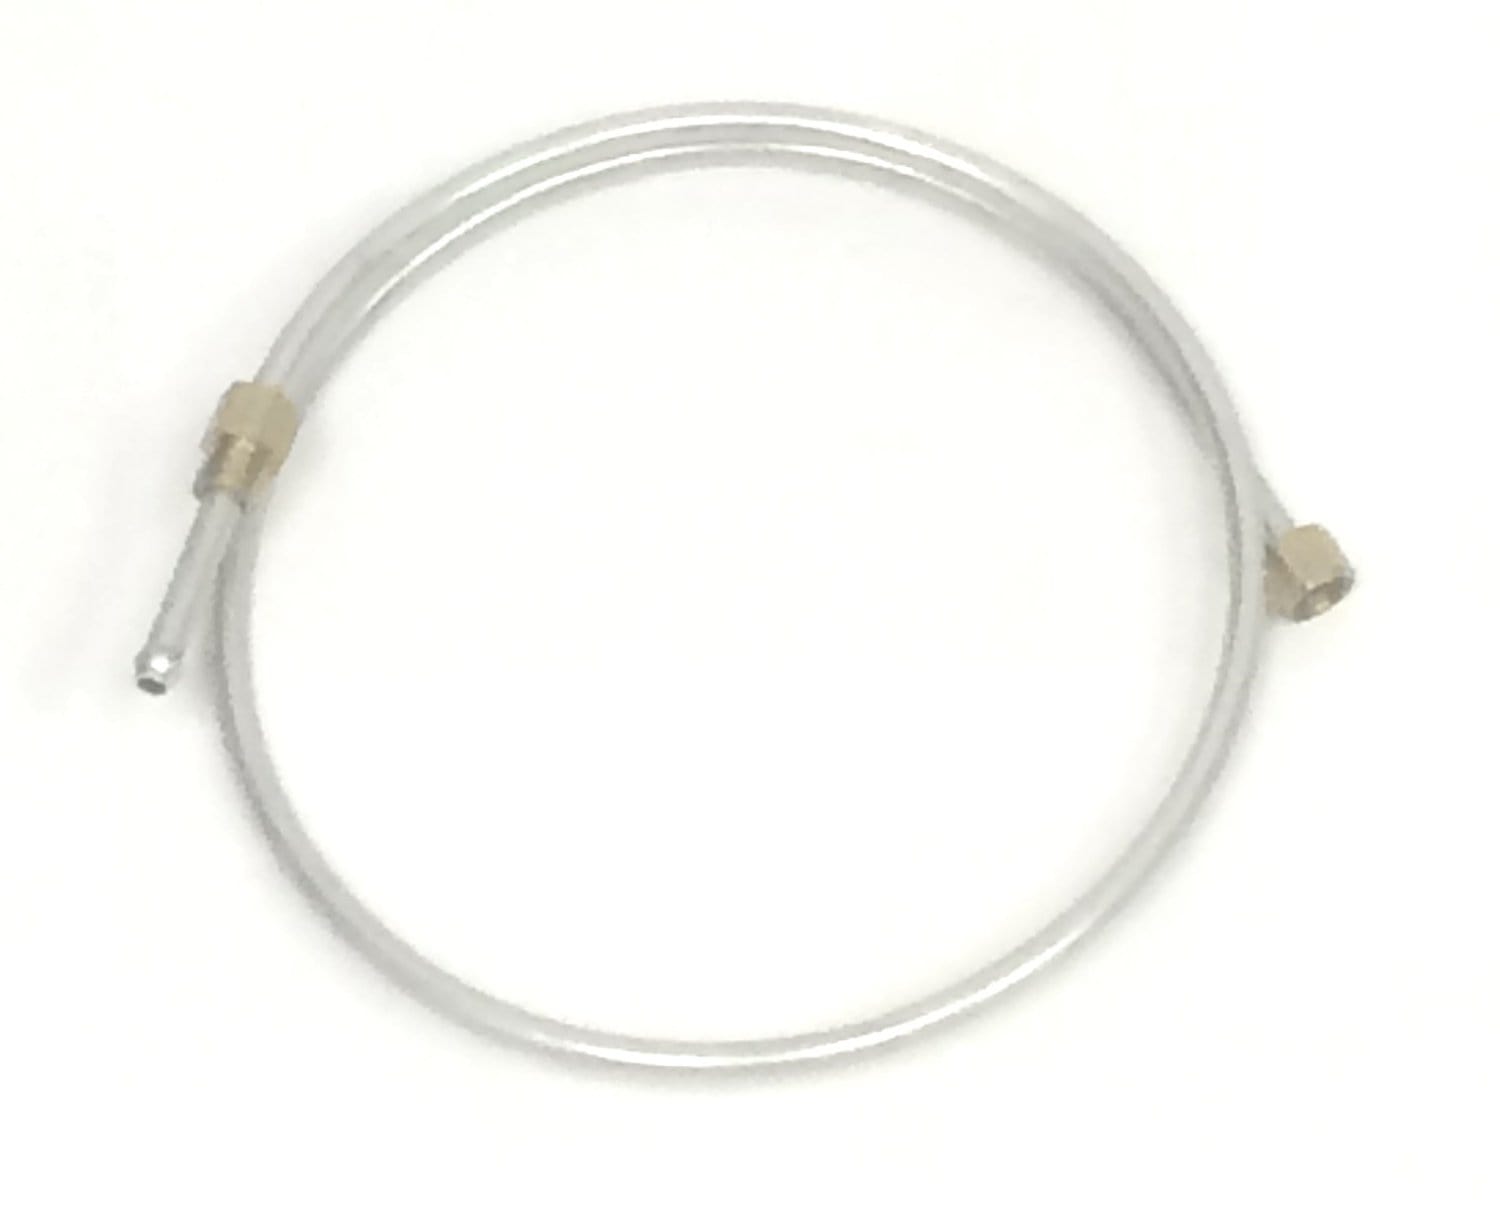 Dometic 57273 Atwood Gas Tube Supply for Wedgewood Ranges and Ovens